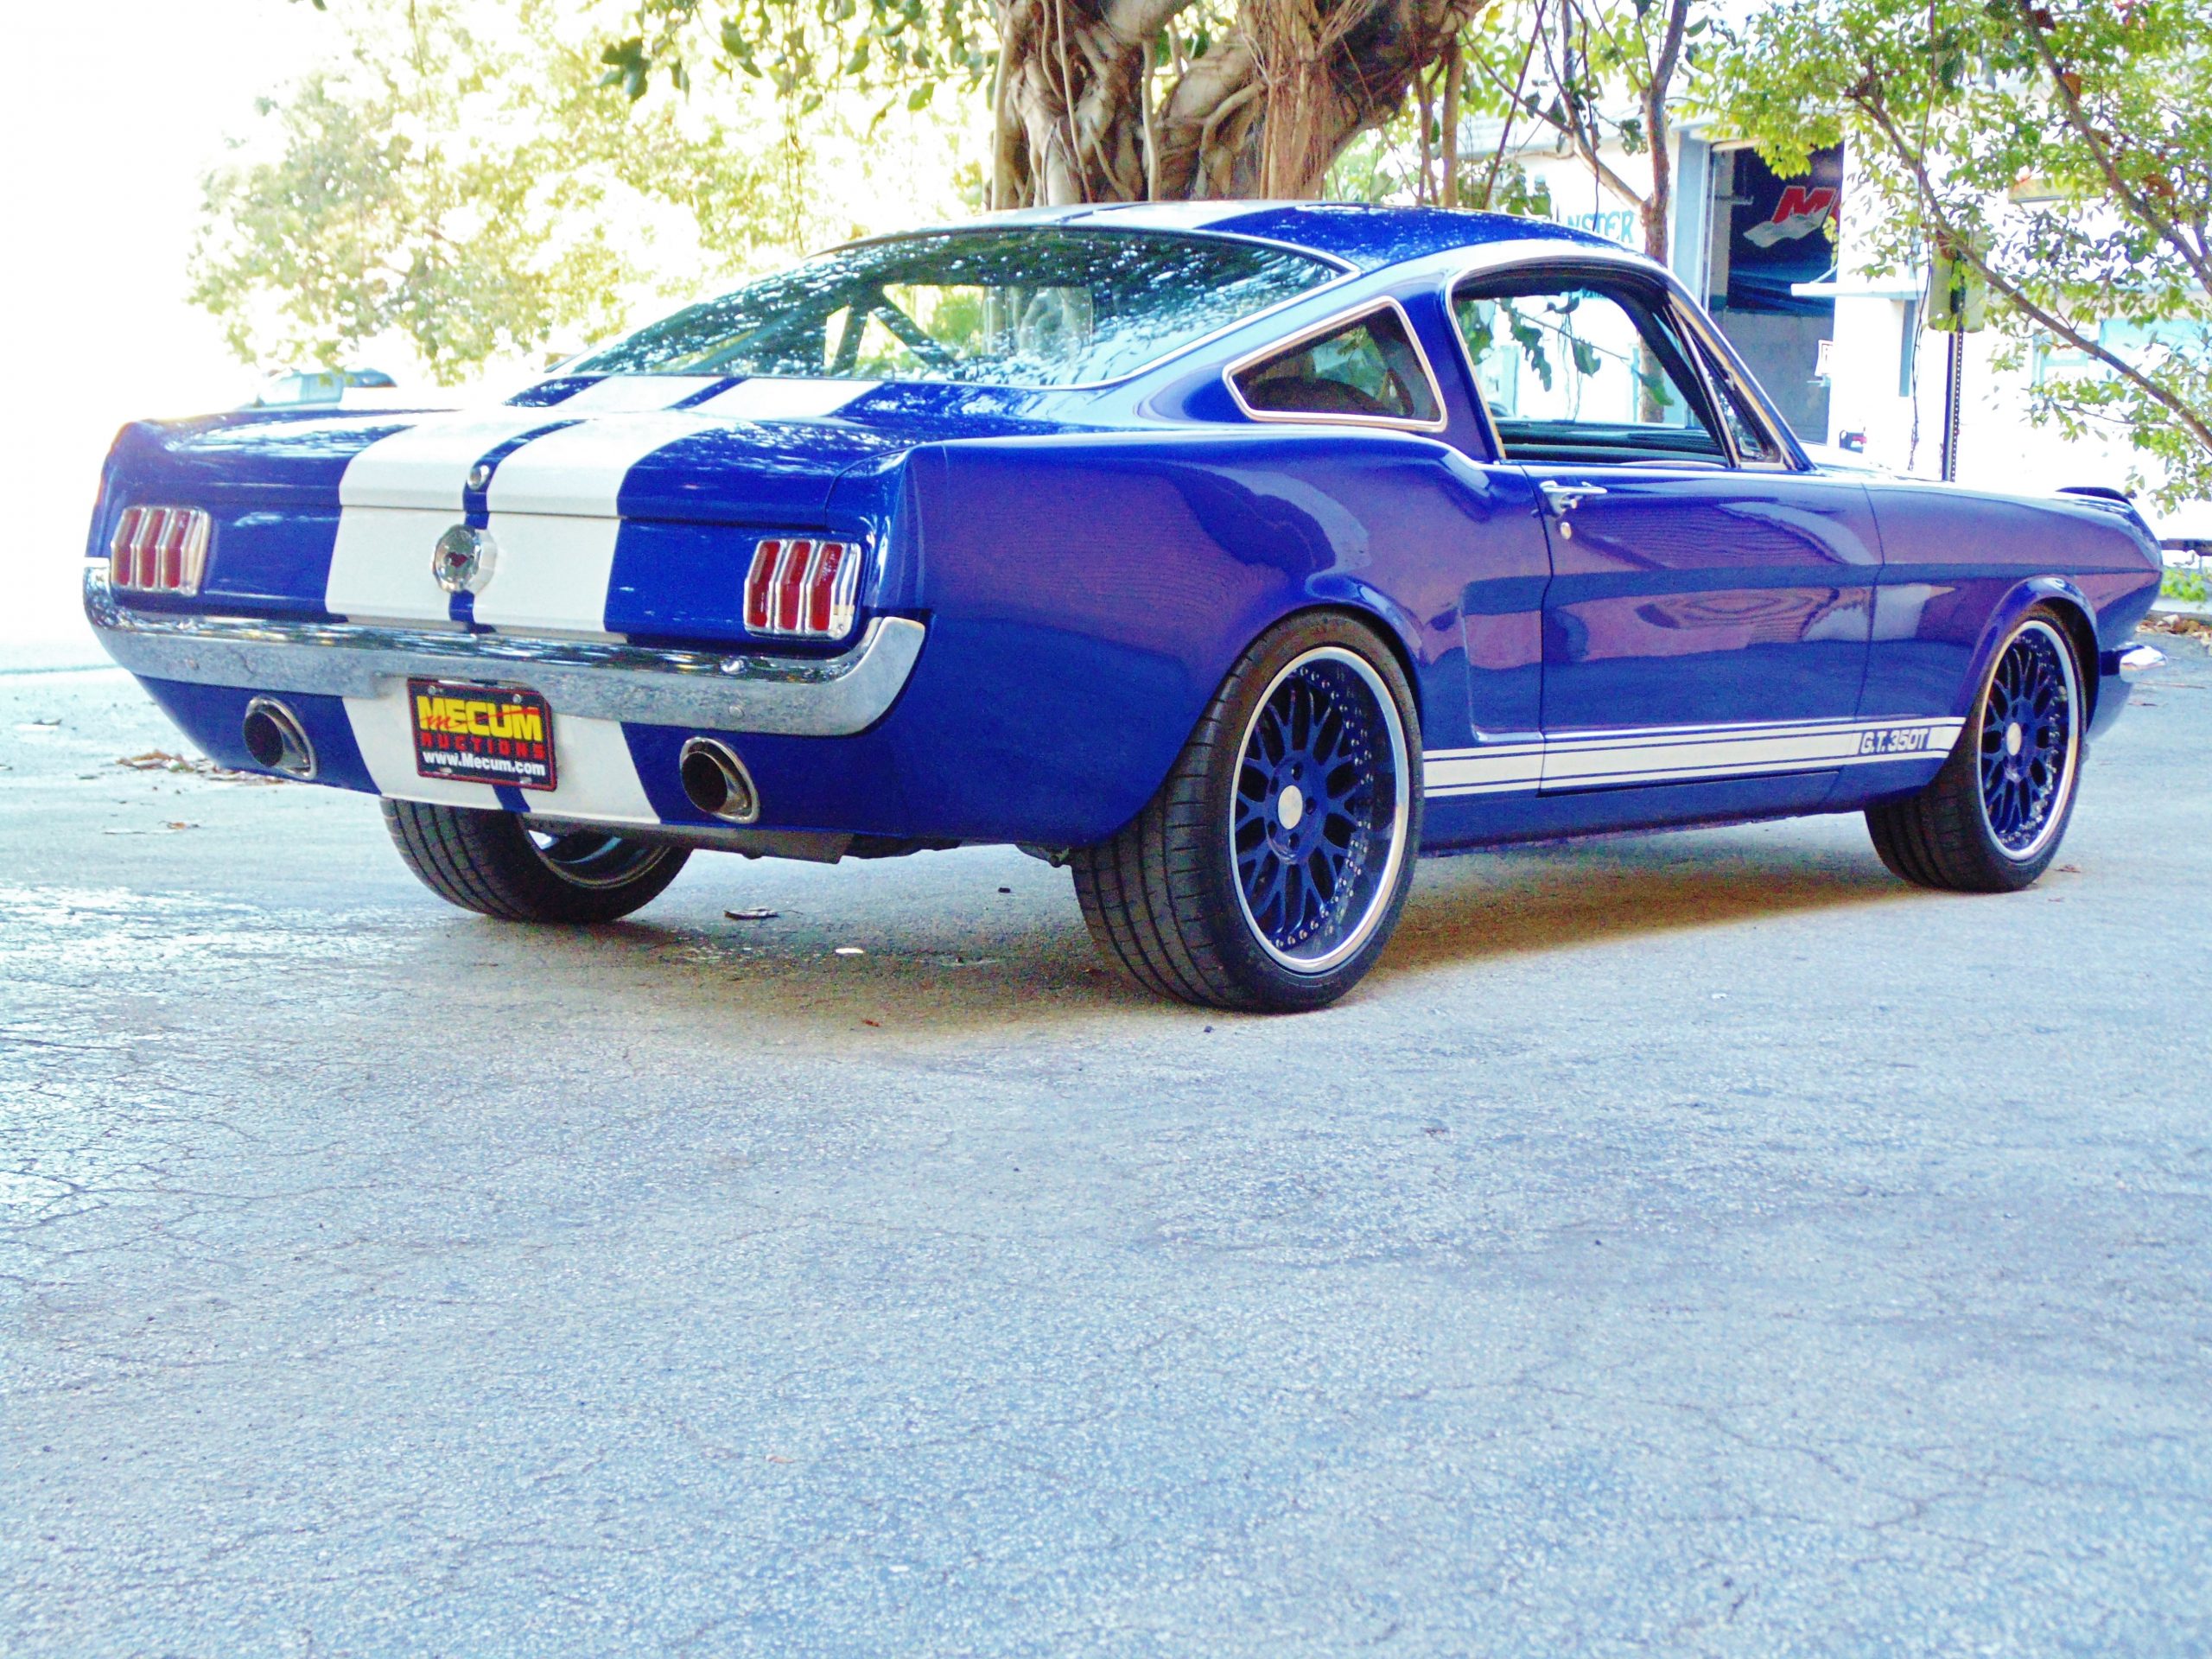 Muscle Cars For Sale In Southwest Florida - Edukasinewss